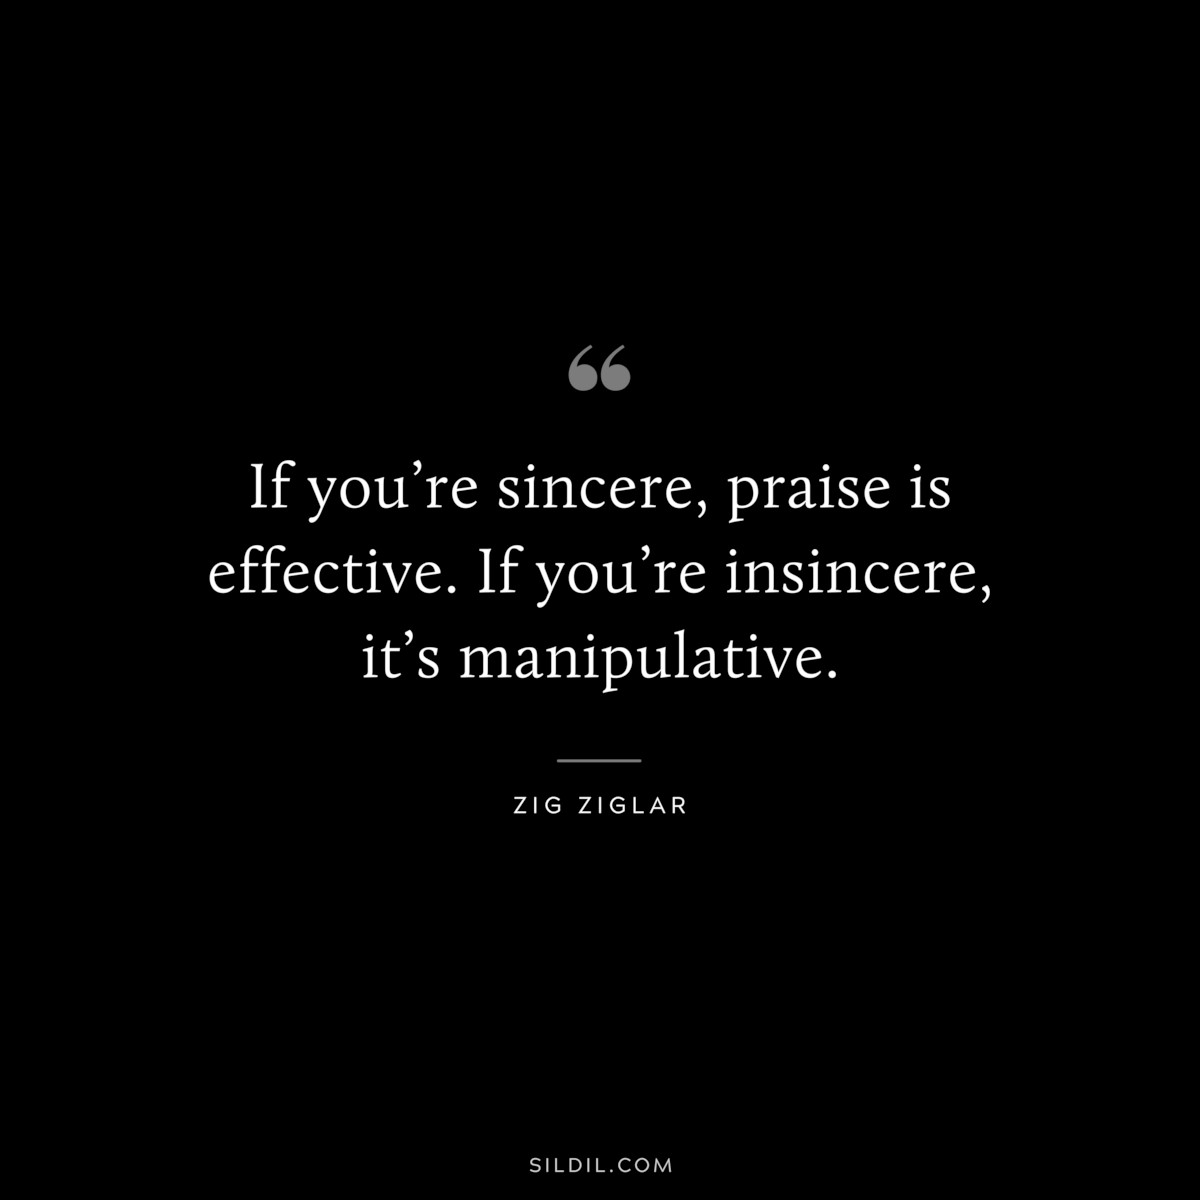 If you’re sincere, praise is effective. If you’re insincere, it’s manipulative. ― Zig Ziglar